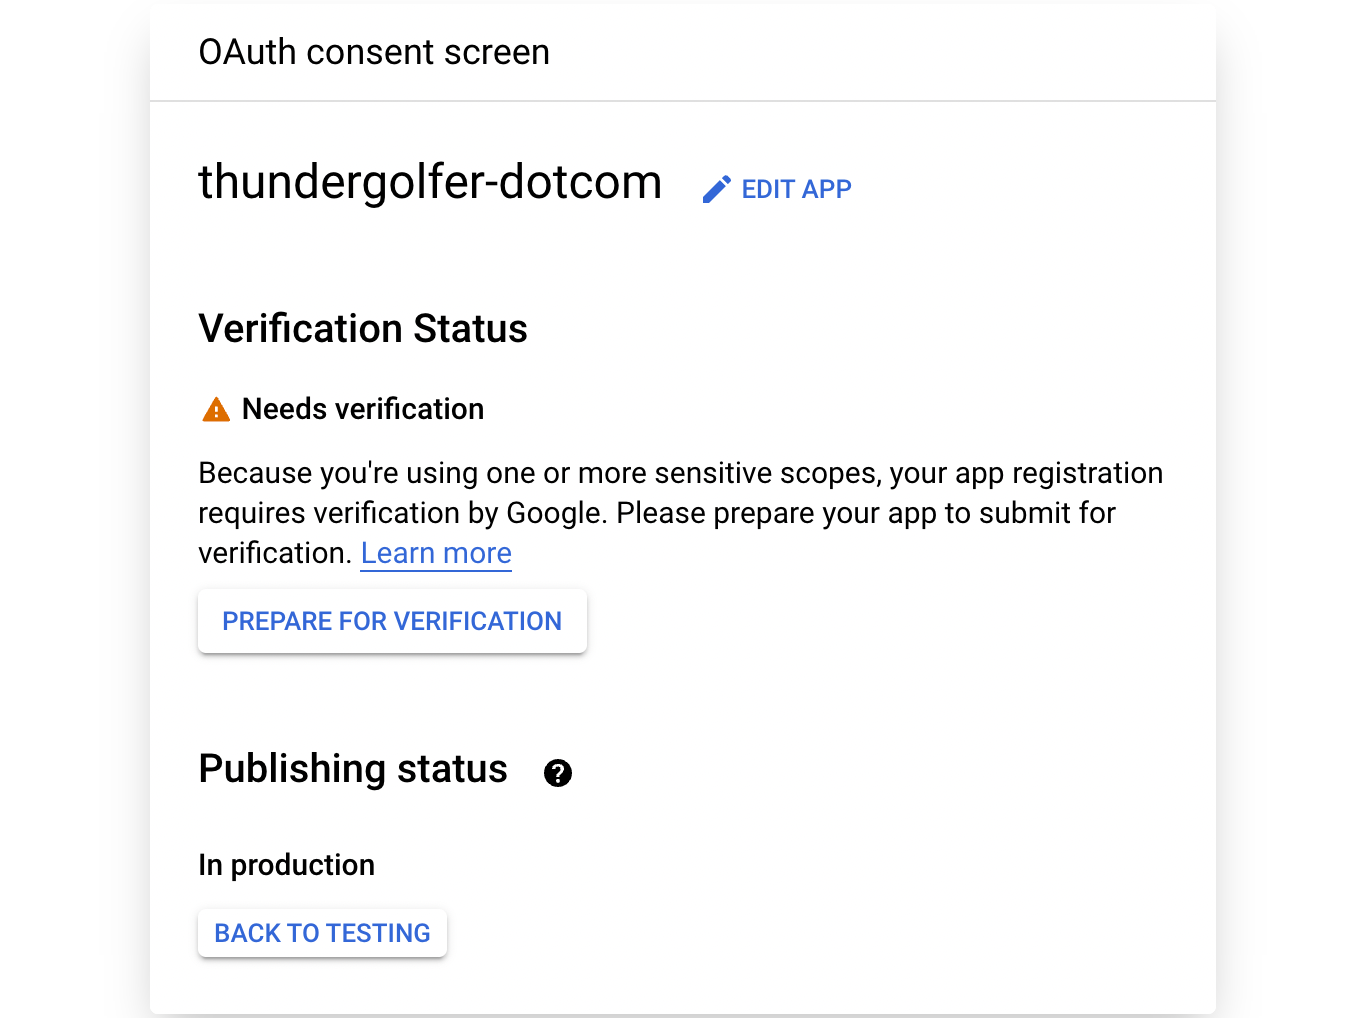 ensure the Google Cloud app is 'in production'